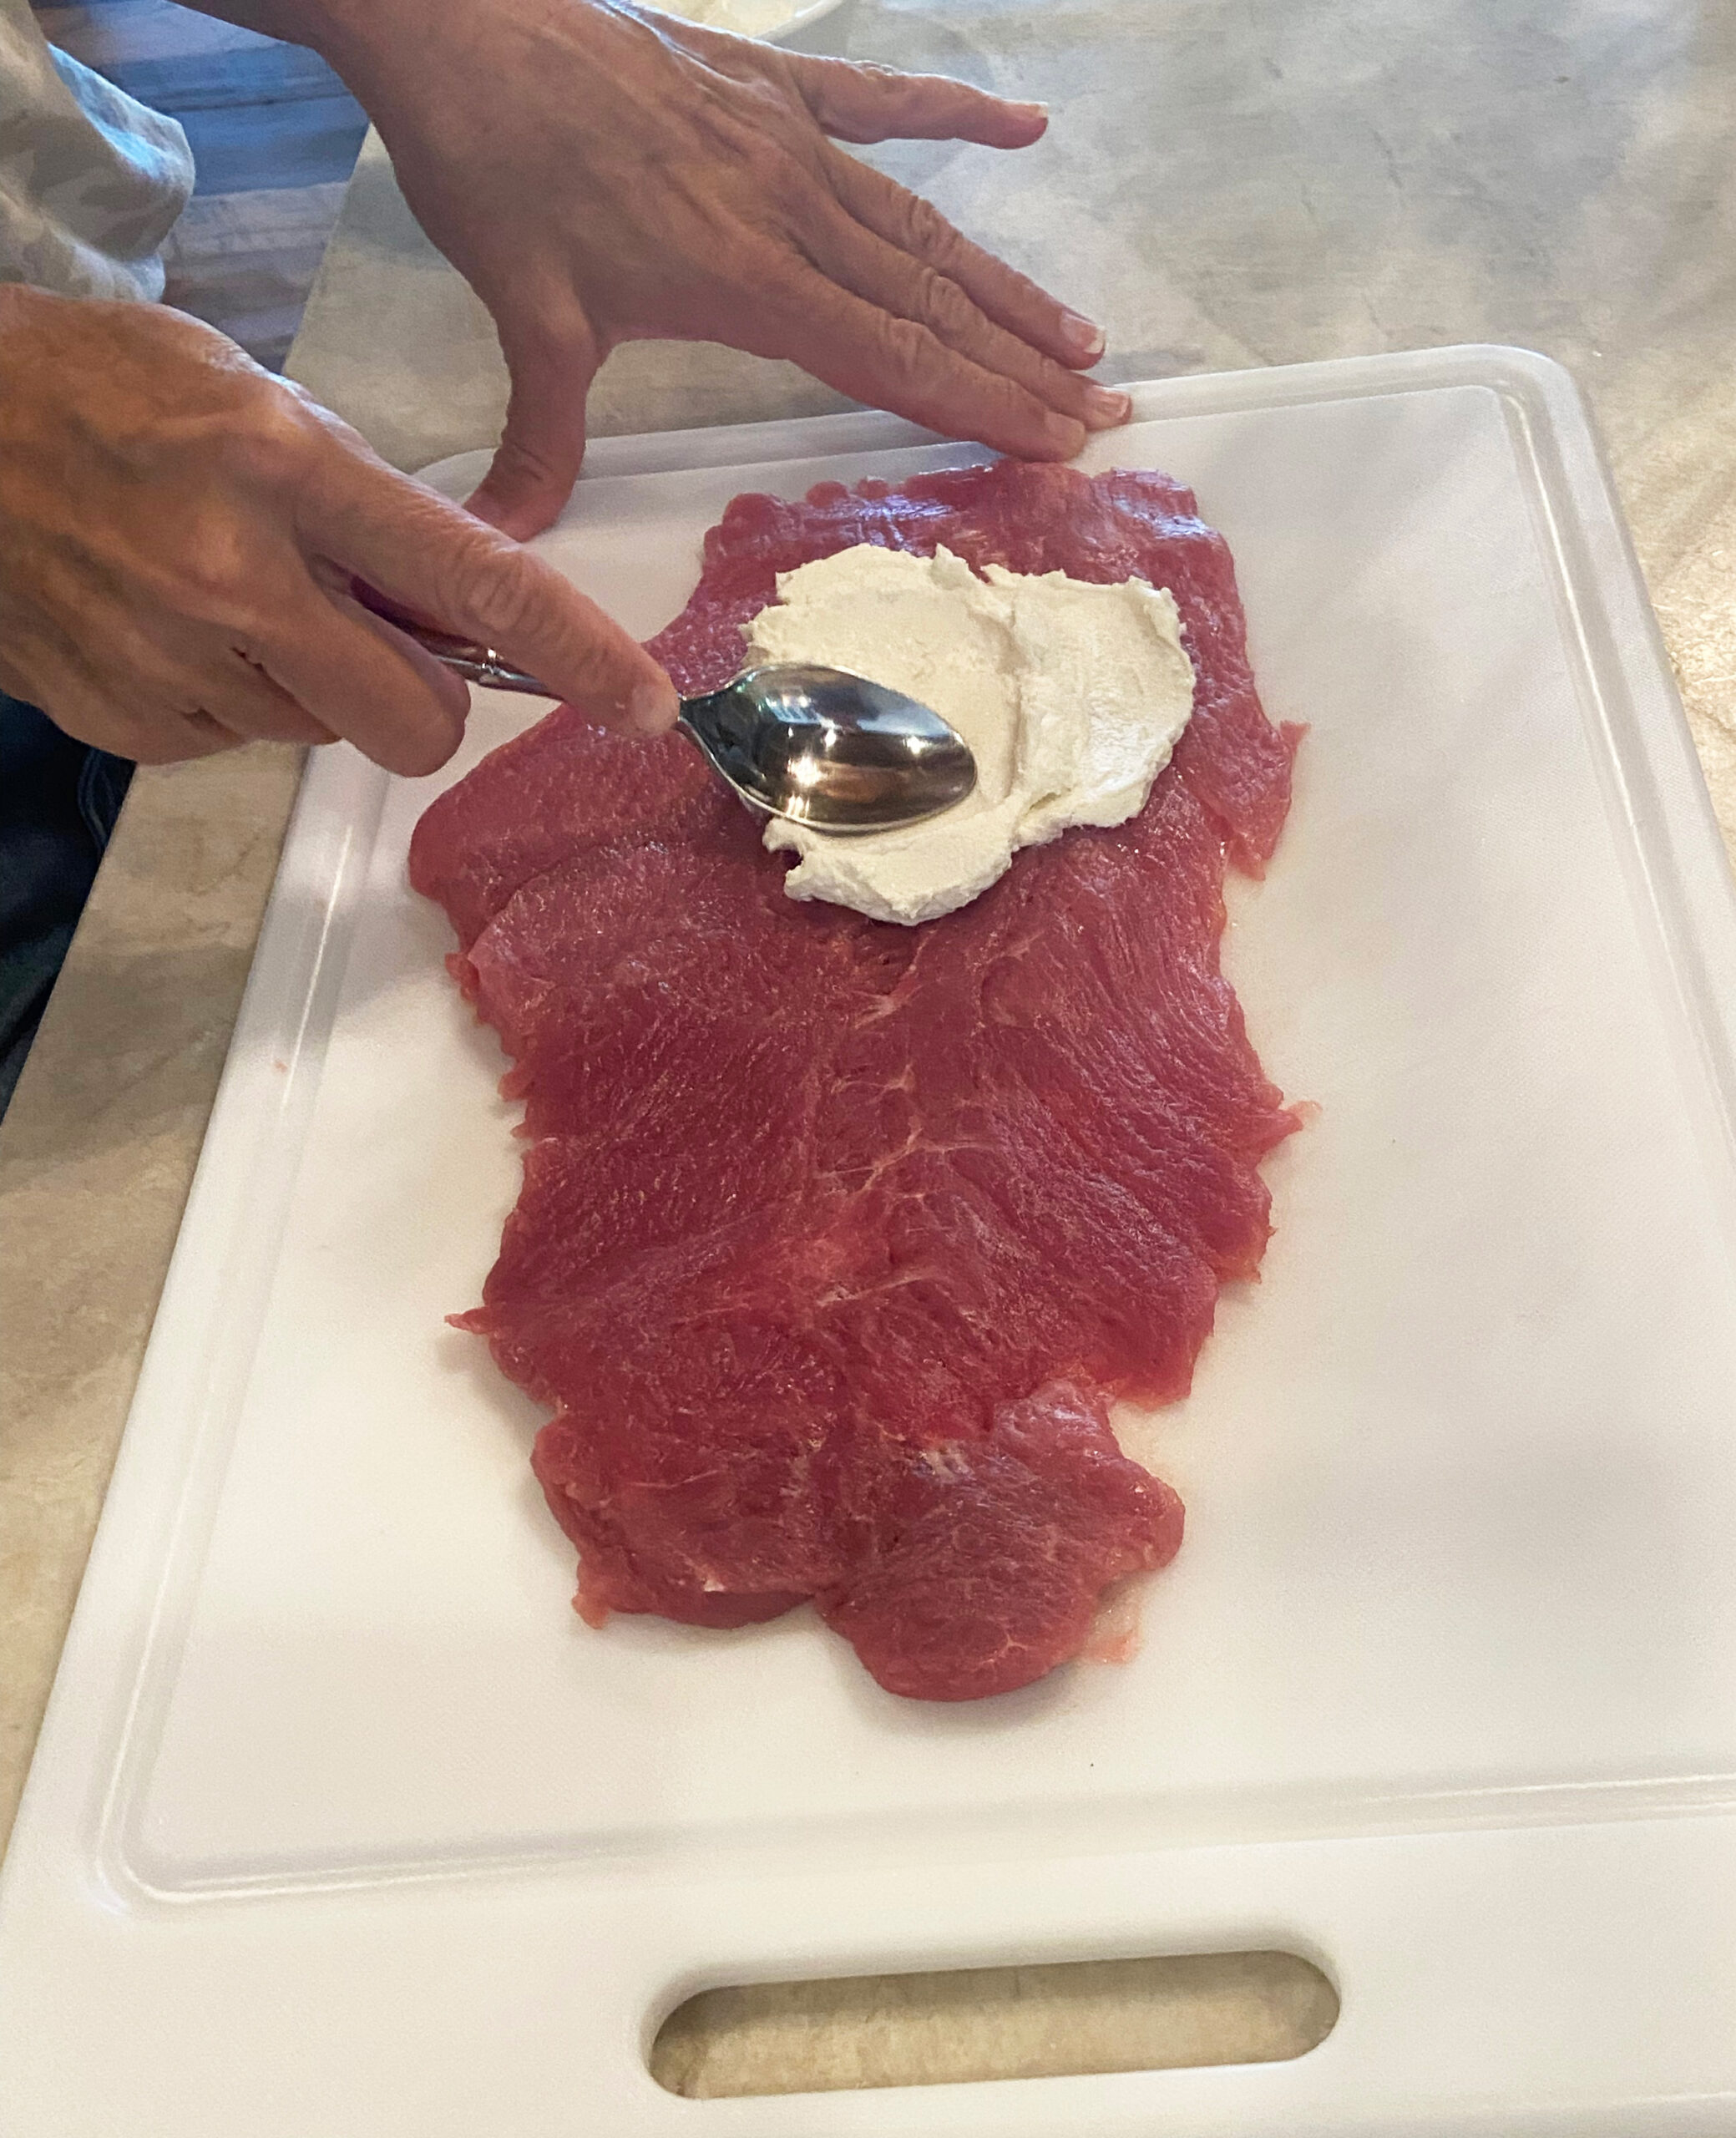 Person using a spoon to spread goat cheese over the surface of a flattened pork tenderloin.